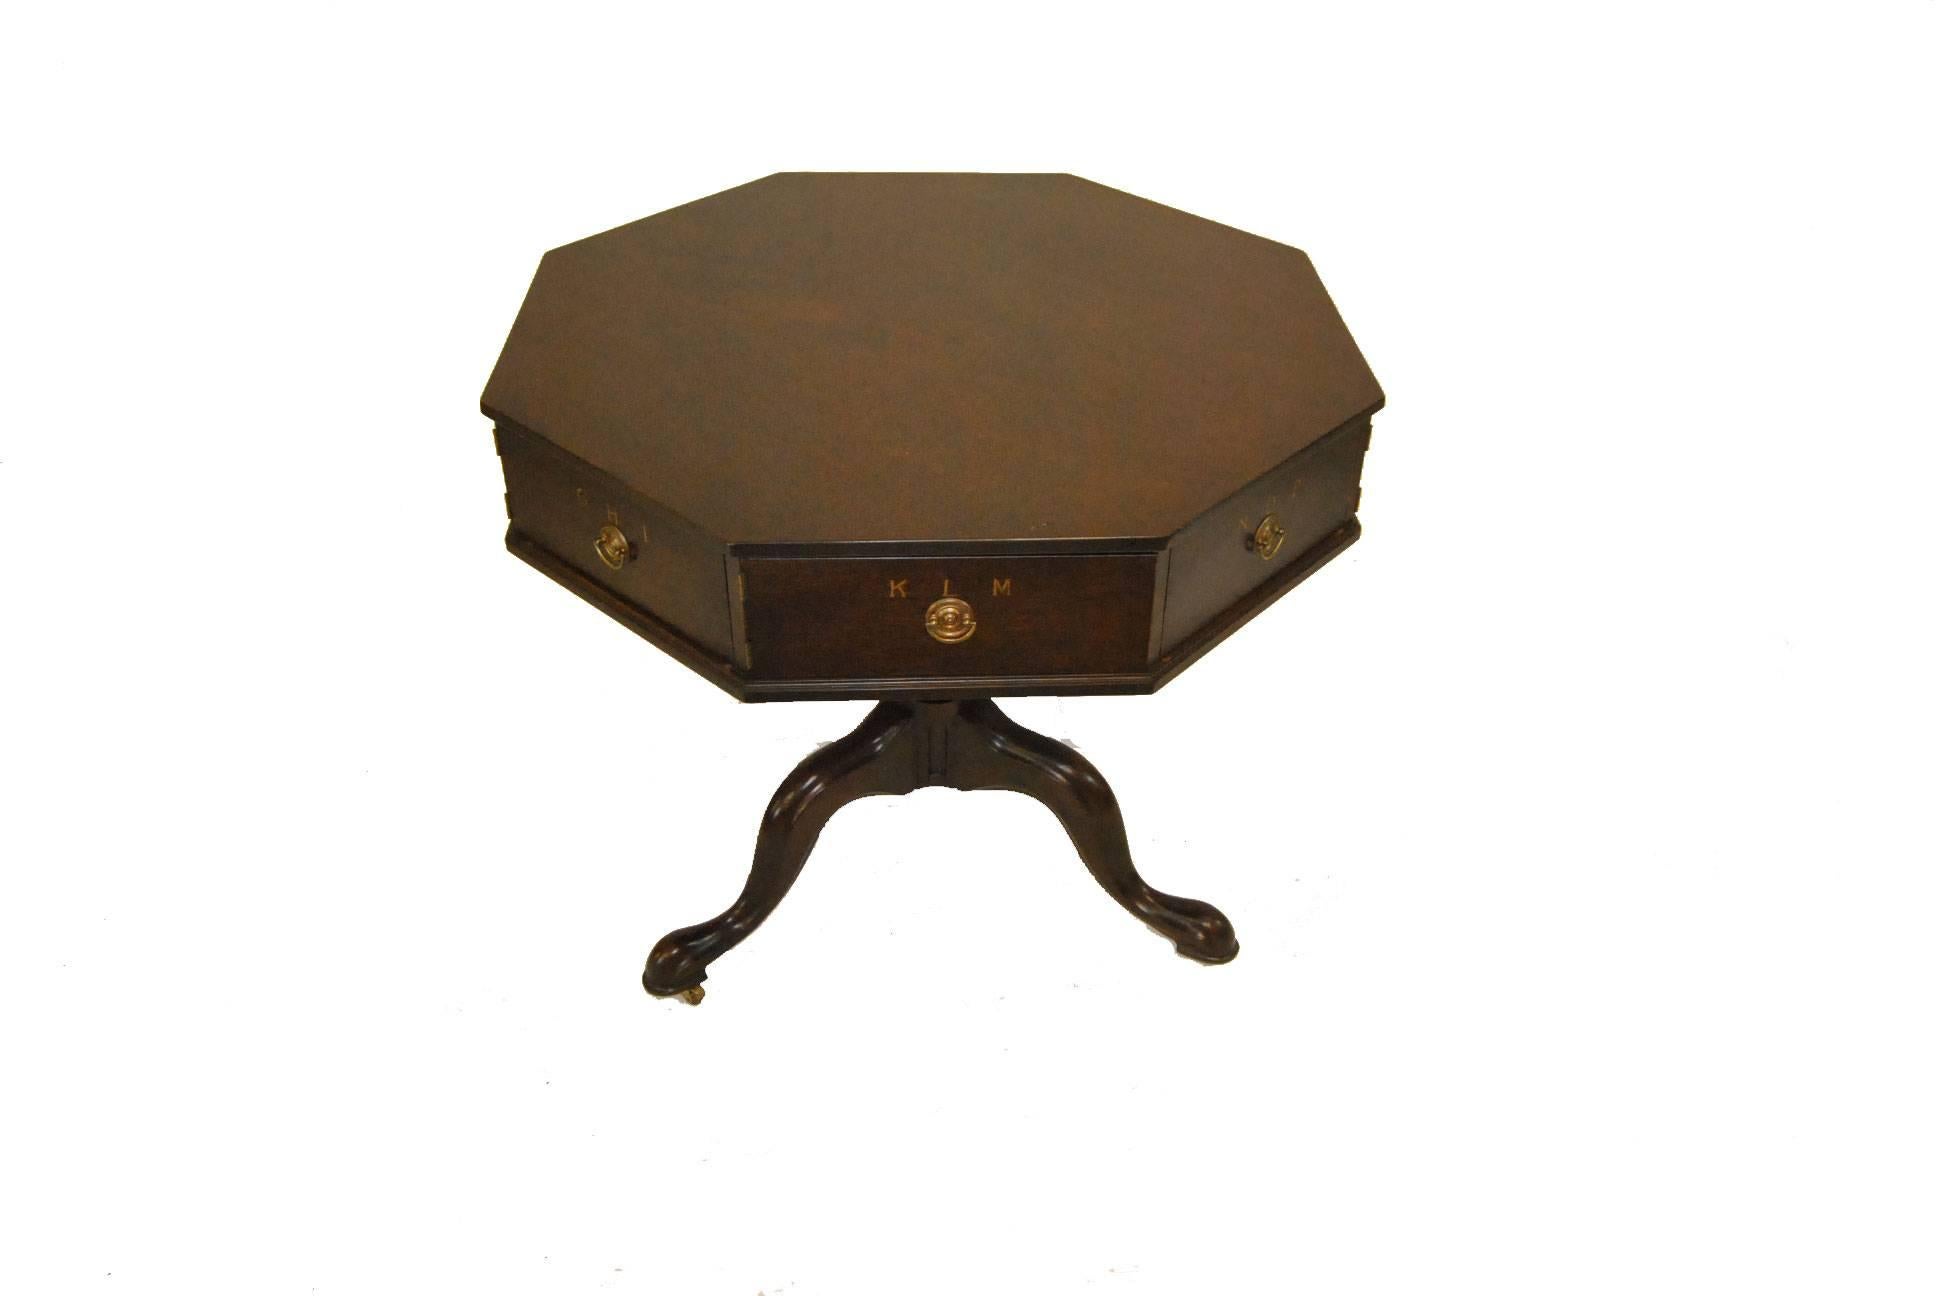 A beautiful mahogany rent table by Kittinger. This table is part of the Jefferson collection that was authorized by the Thomas Jefferson Memorial Foundation. It is a reproduction of the original table which was used by Thomas Jefferson and is